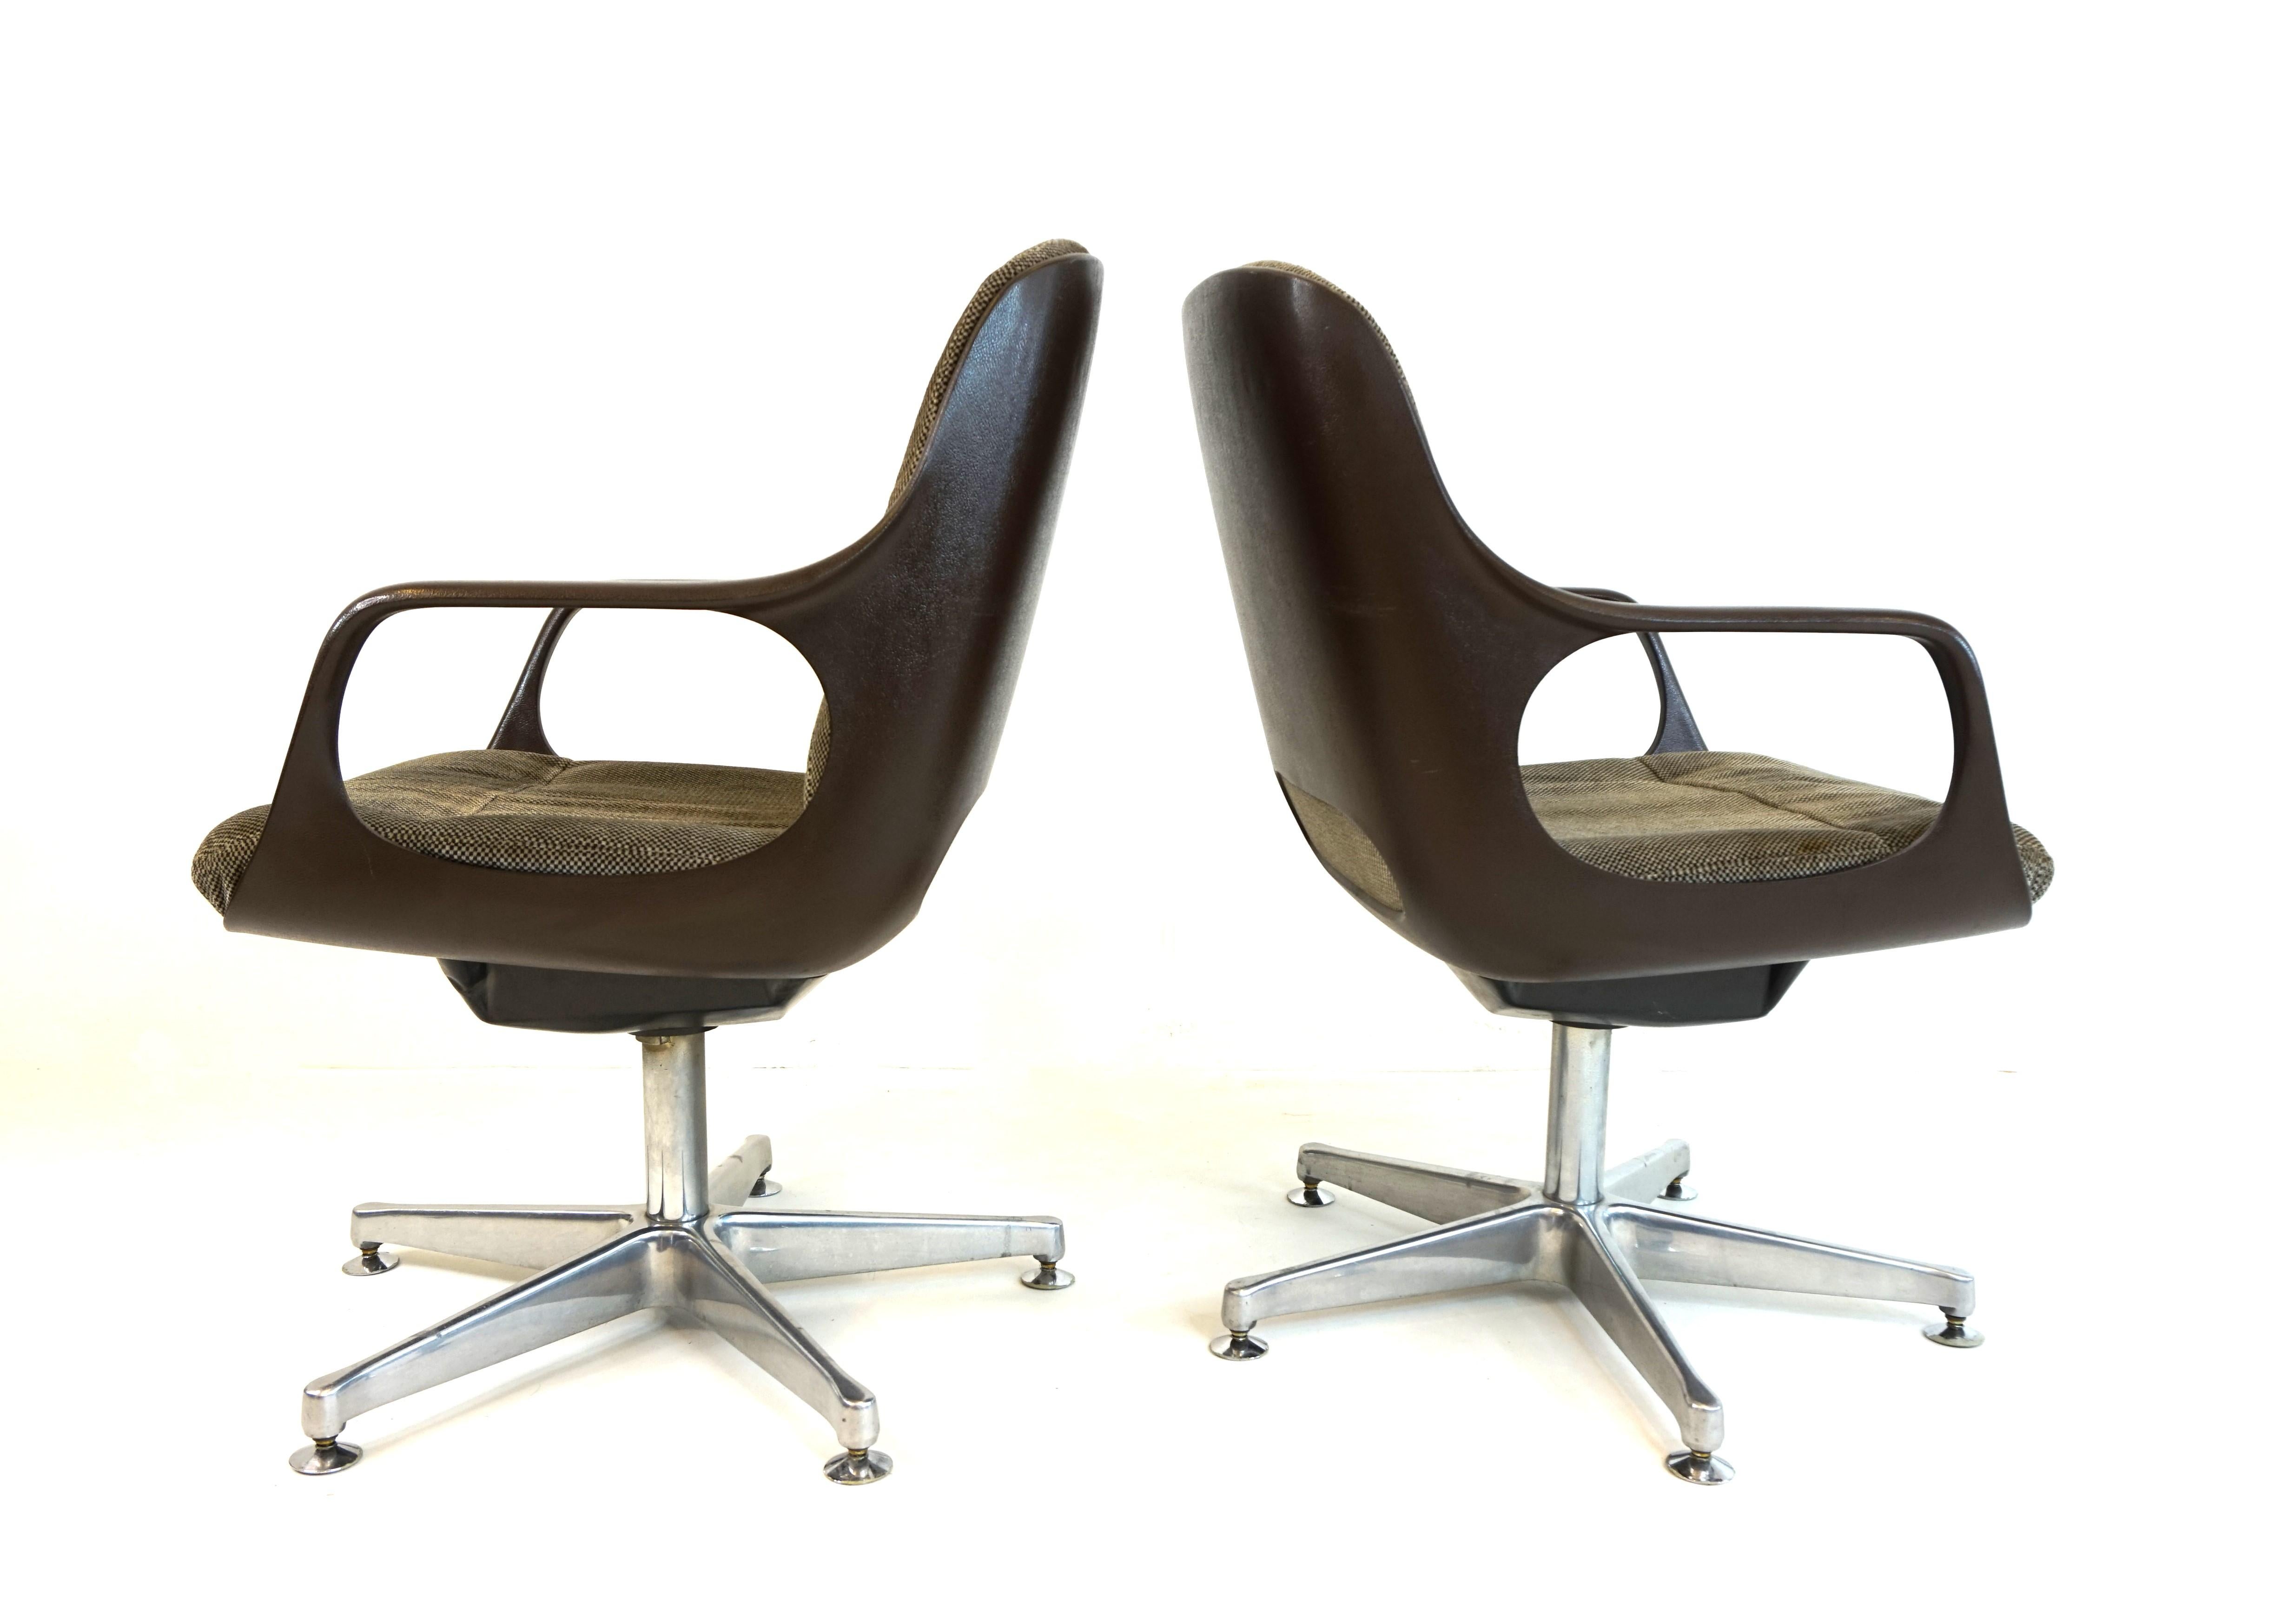 Chromcraft Set of 2 Space Age Office/Dining Room Chairs 2